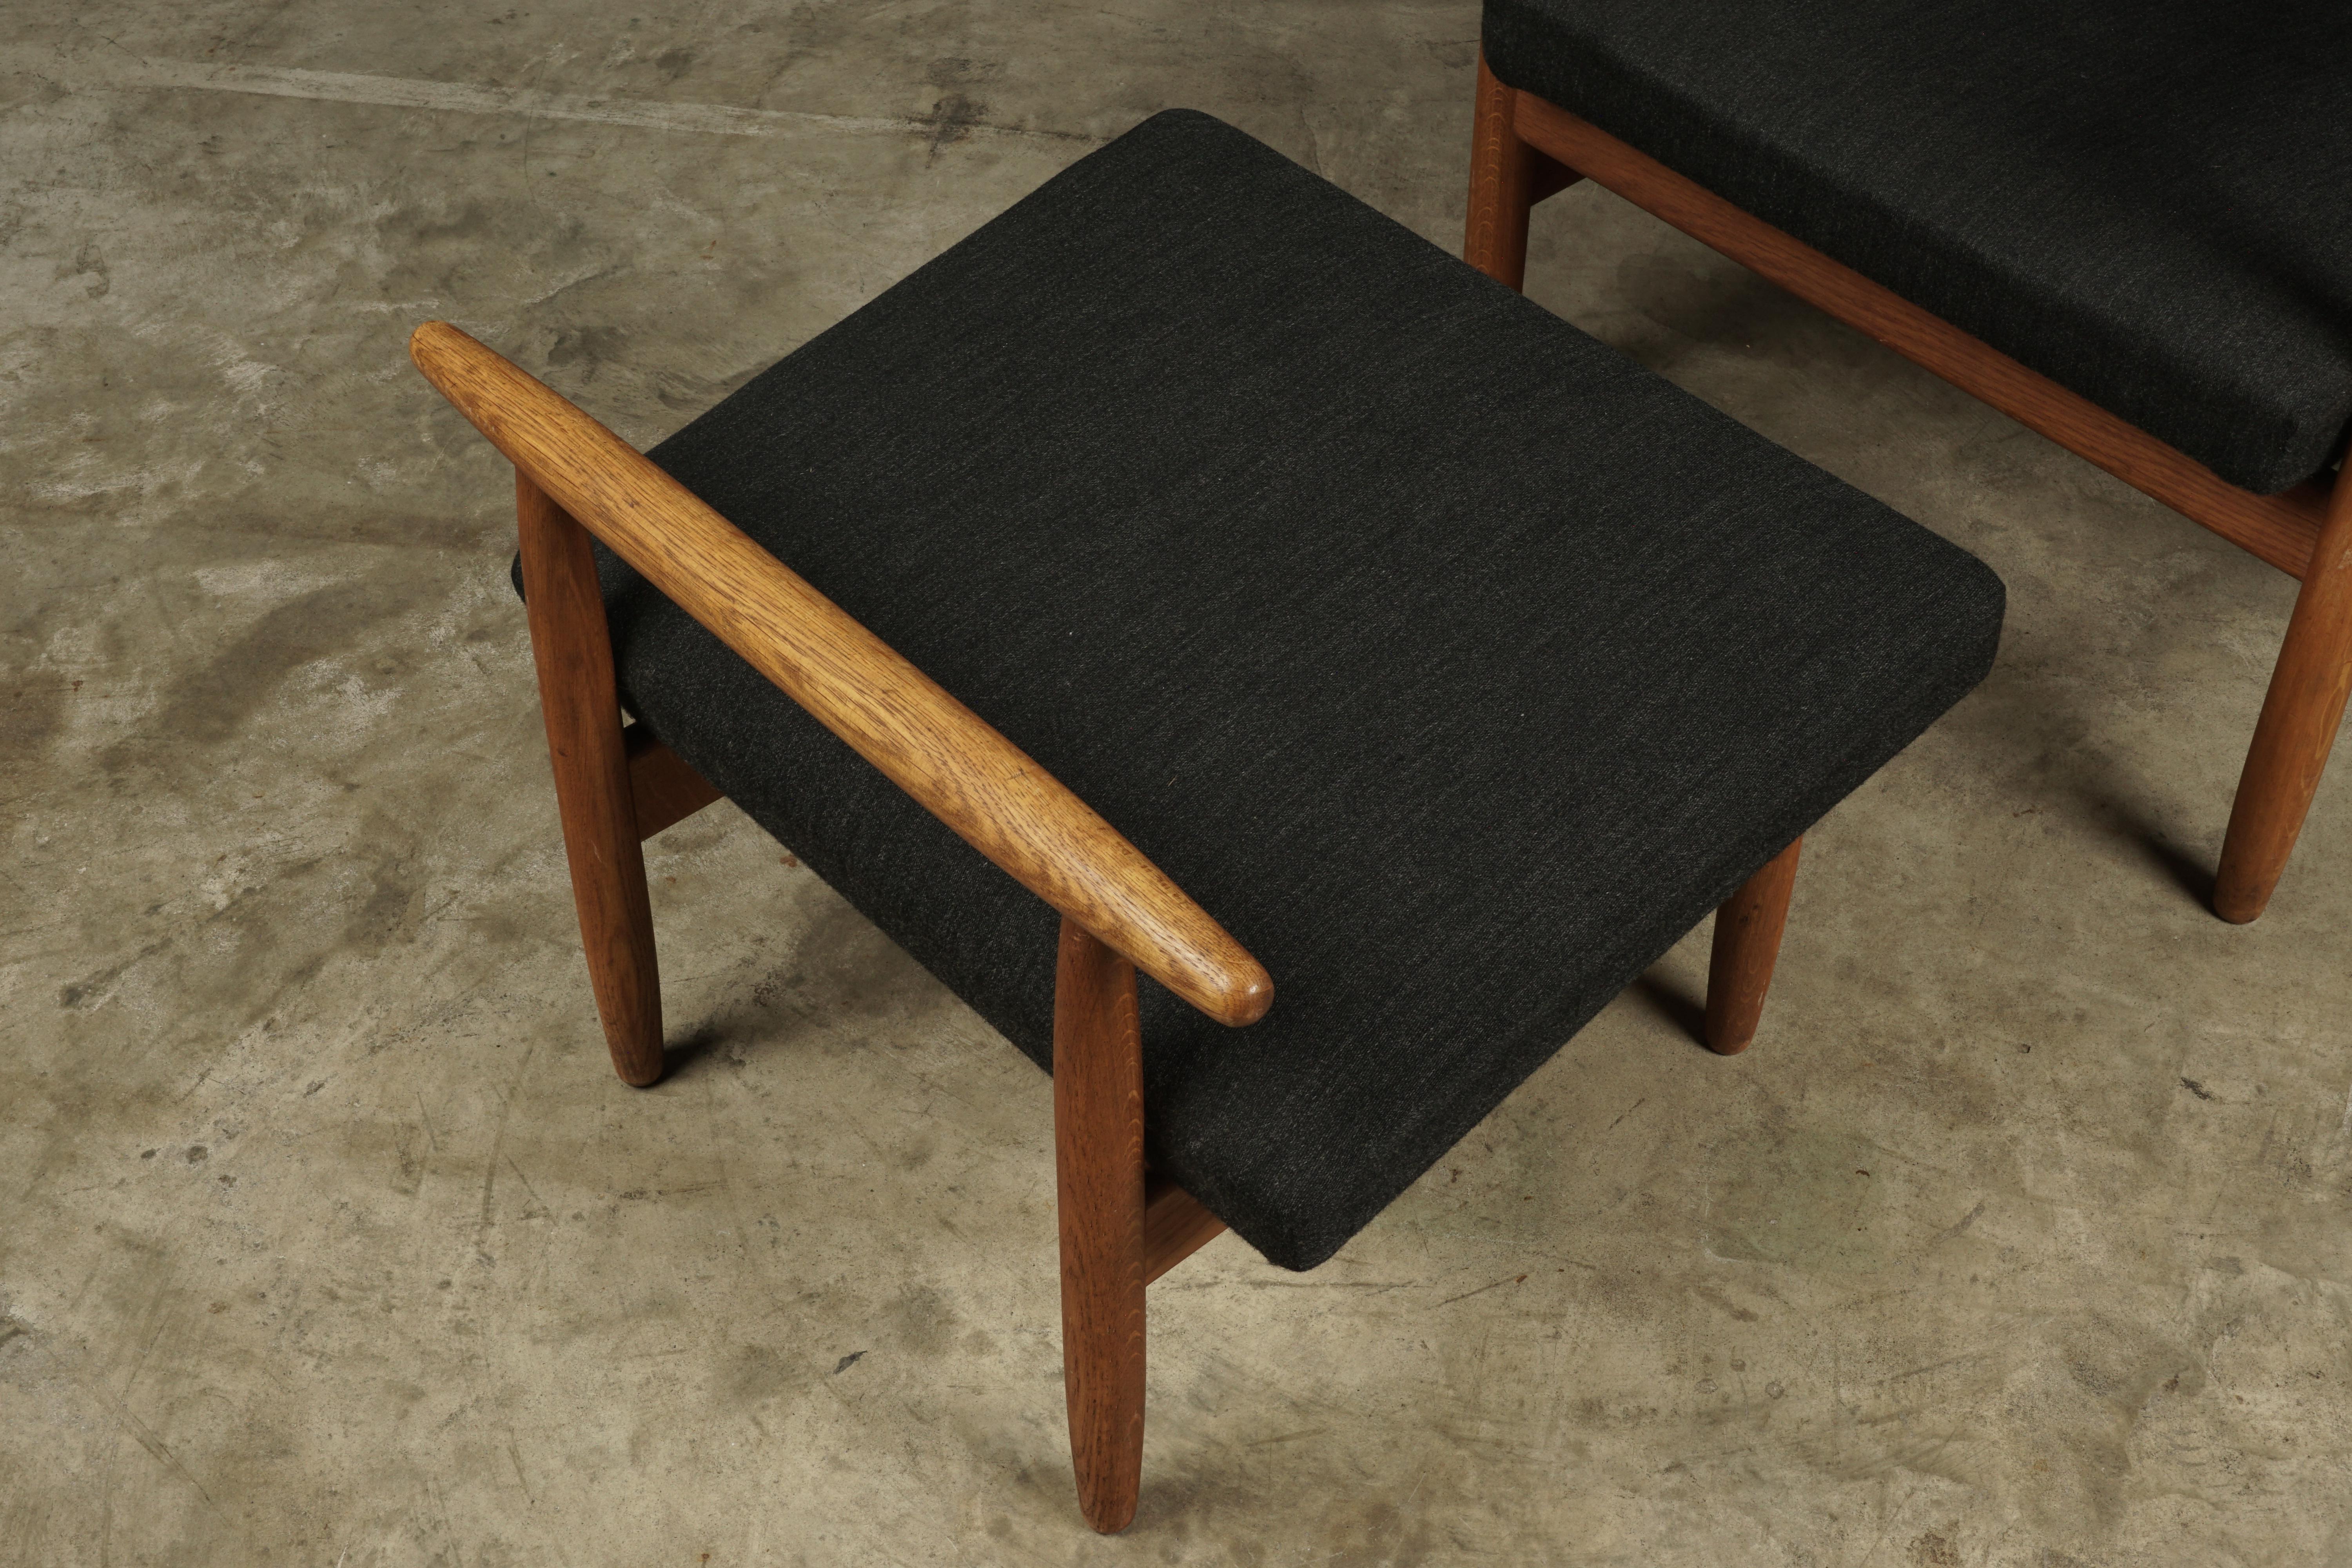 Vintage lounge chair and ottoman designed by Elvind Johansson, Denmark, 1960s. Solid oak construction upholstered in a charcoal grey fabric. Light wear and patina. 

Measures: Ottoman H 17, W 22, D 19.